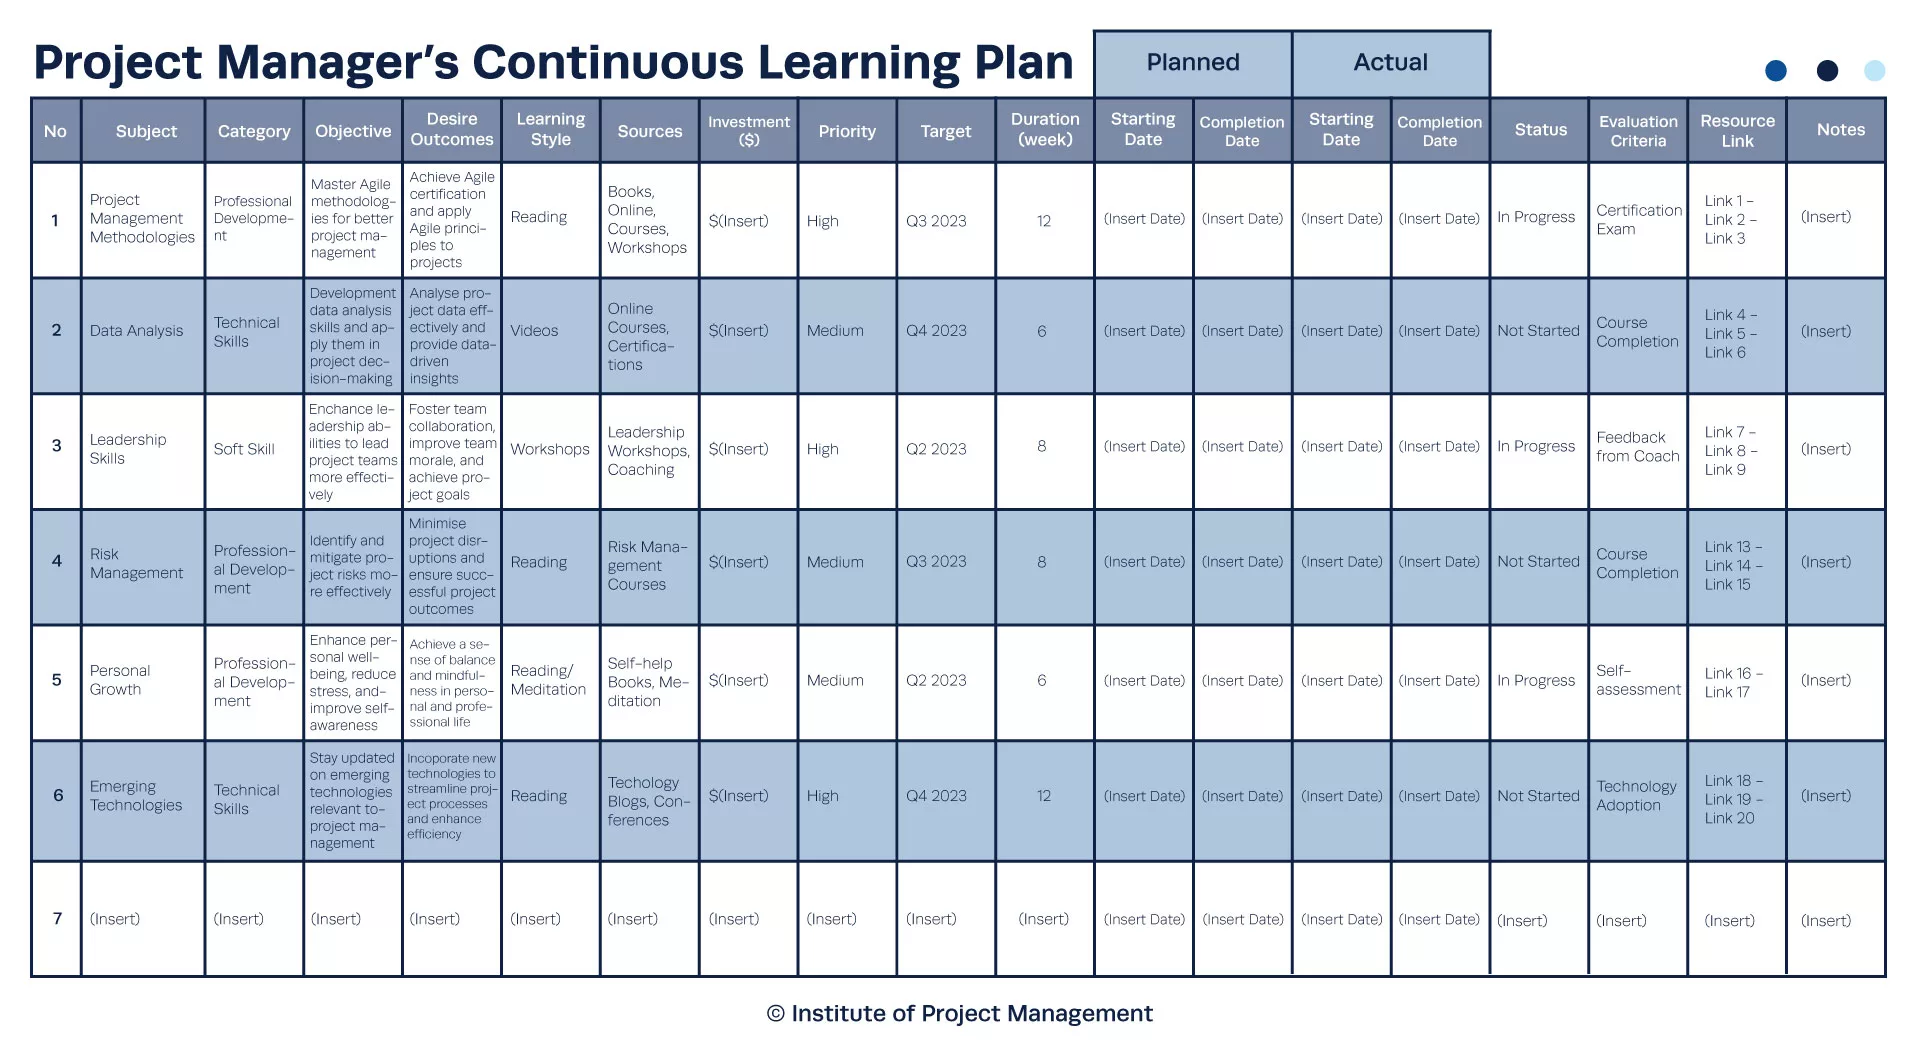 Project Manager's continuous learning plan